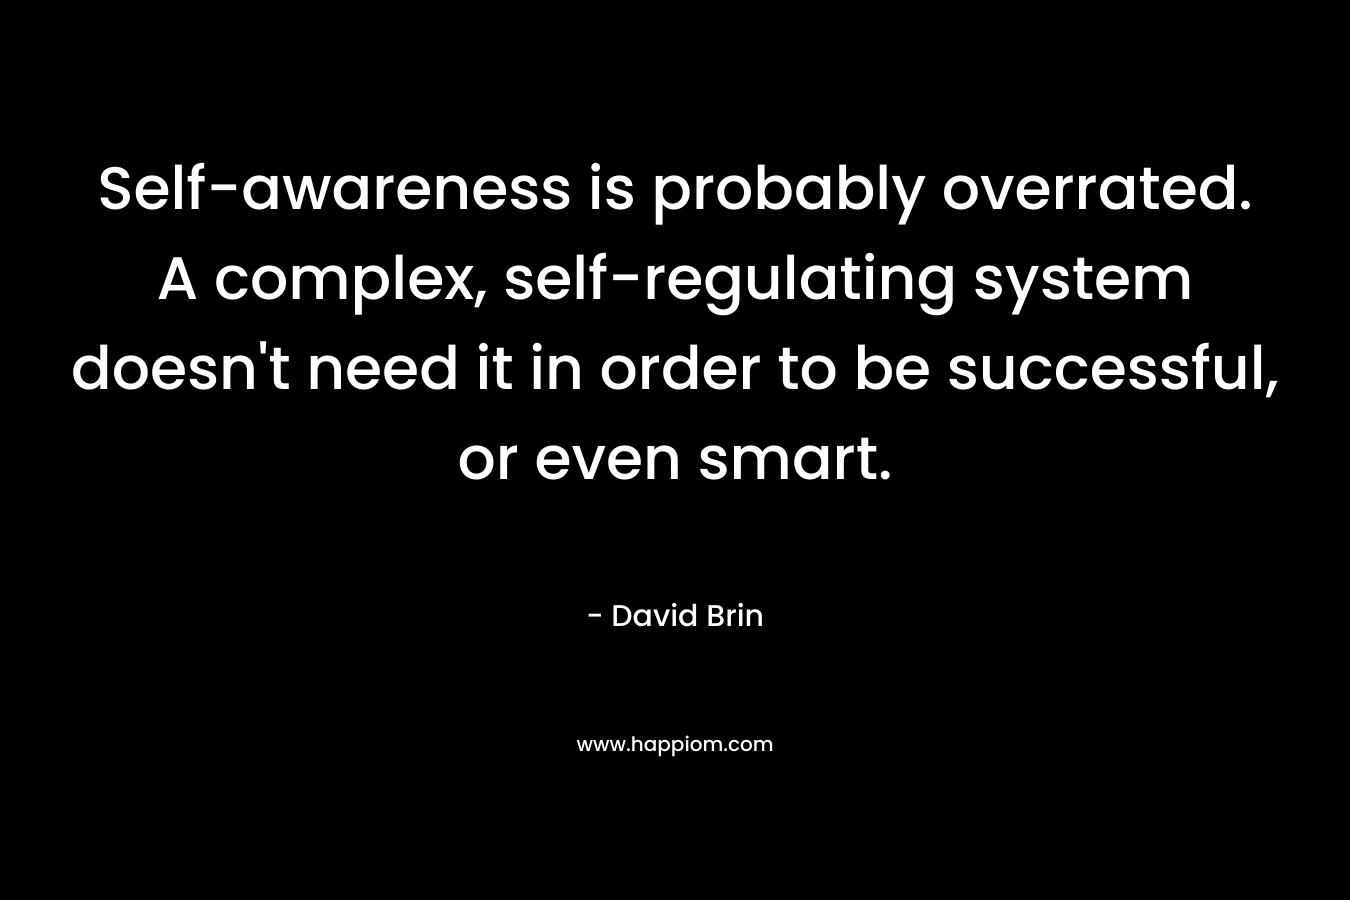 Self-awareness is probably overrated. A complex, self-regulating system doesn’t need it in order to be successful, or even smart. – David Brin